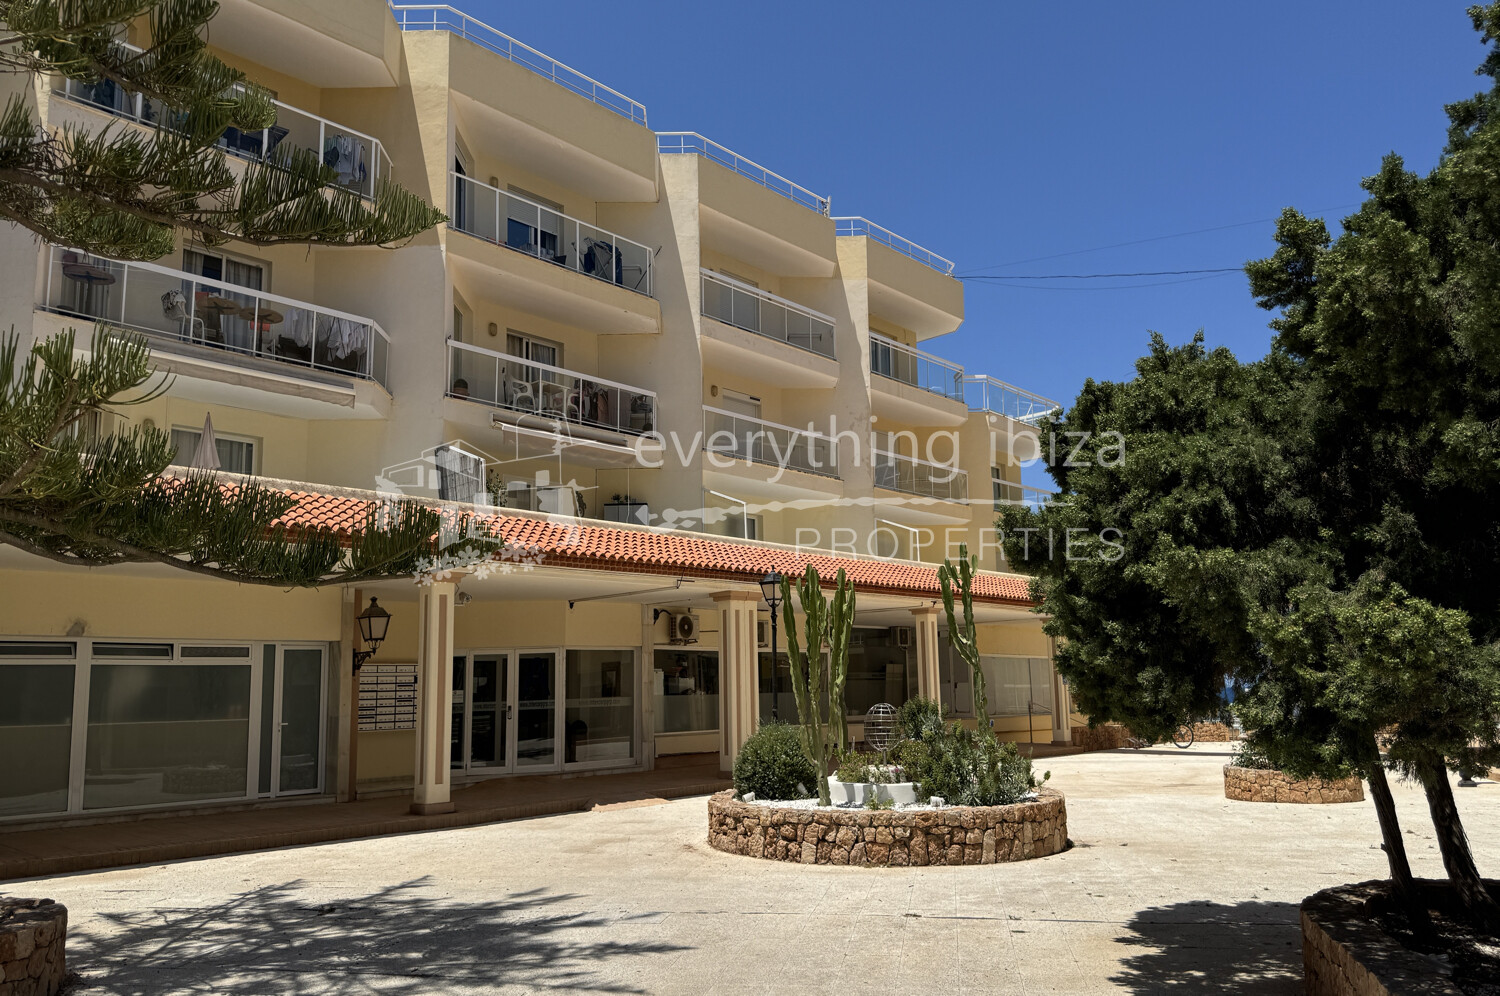 Lovely Modern 2 Bedroomed Furnished Apartment Close to the Sea and Beaches, ref. 1710, for sale in Ibiza by everything ibiza Properties